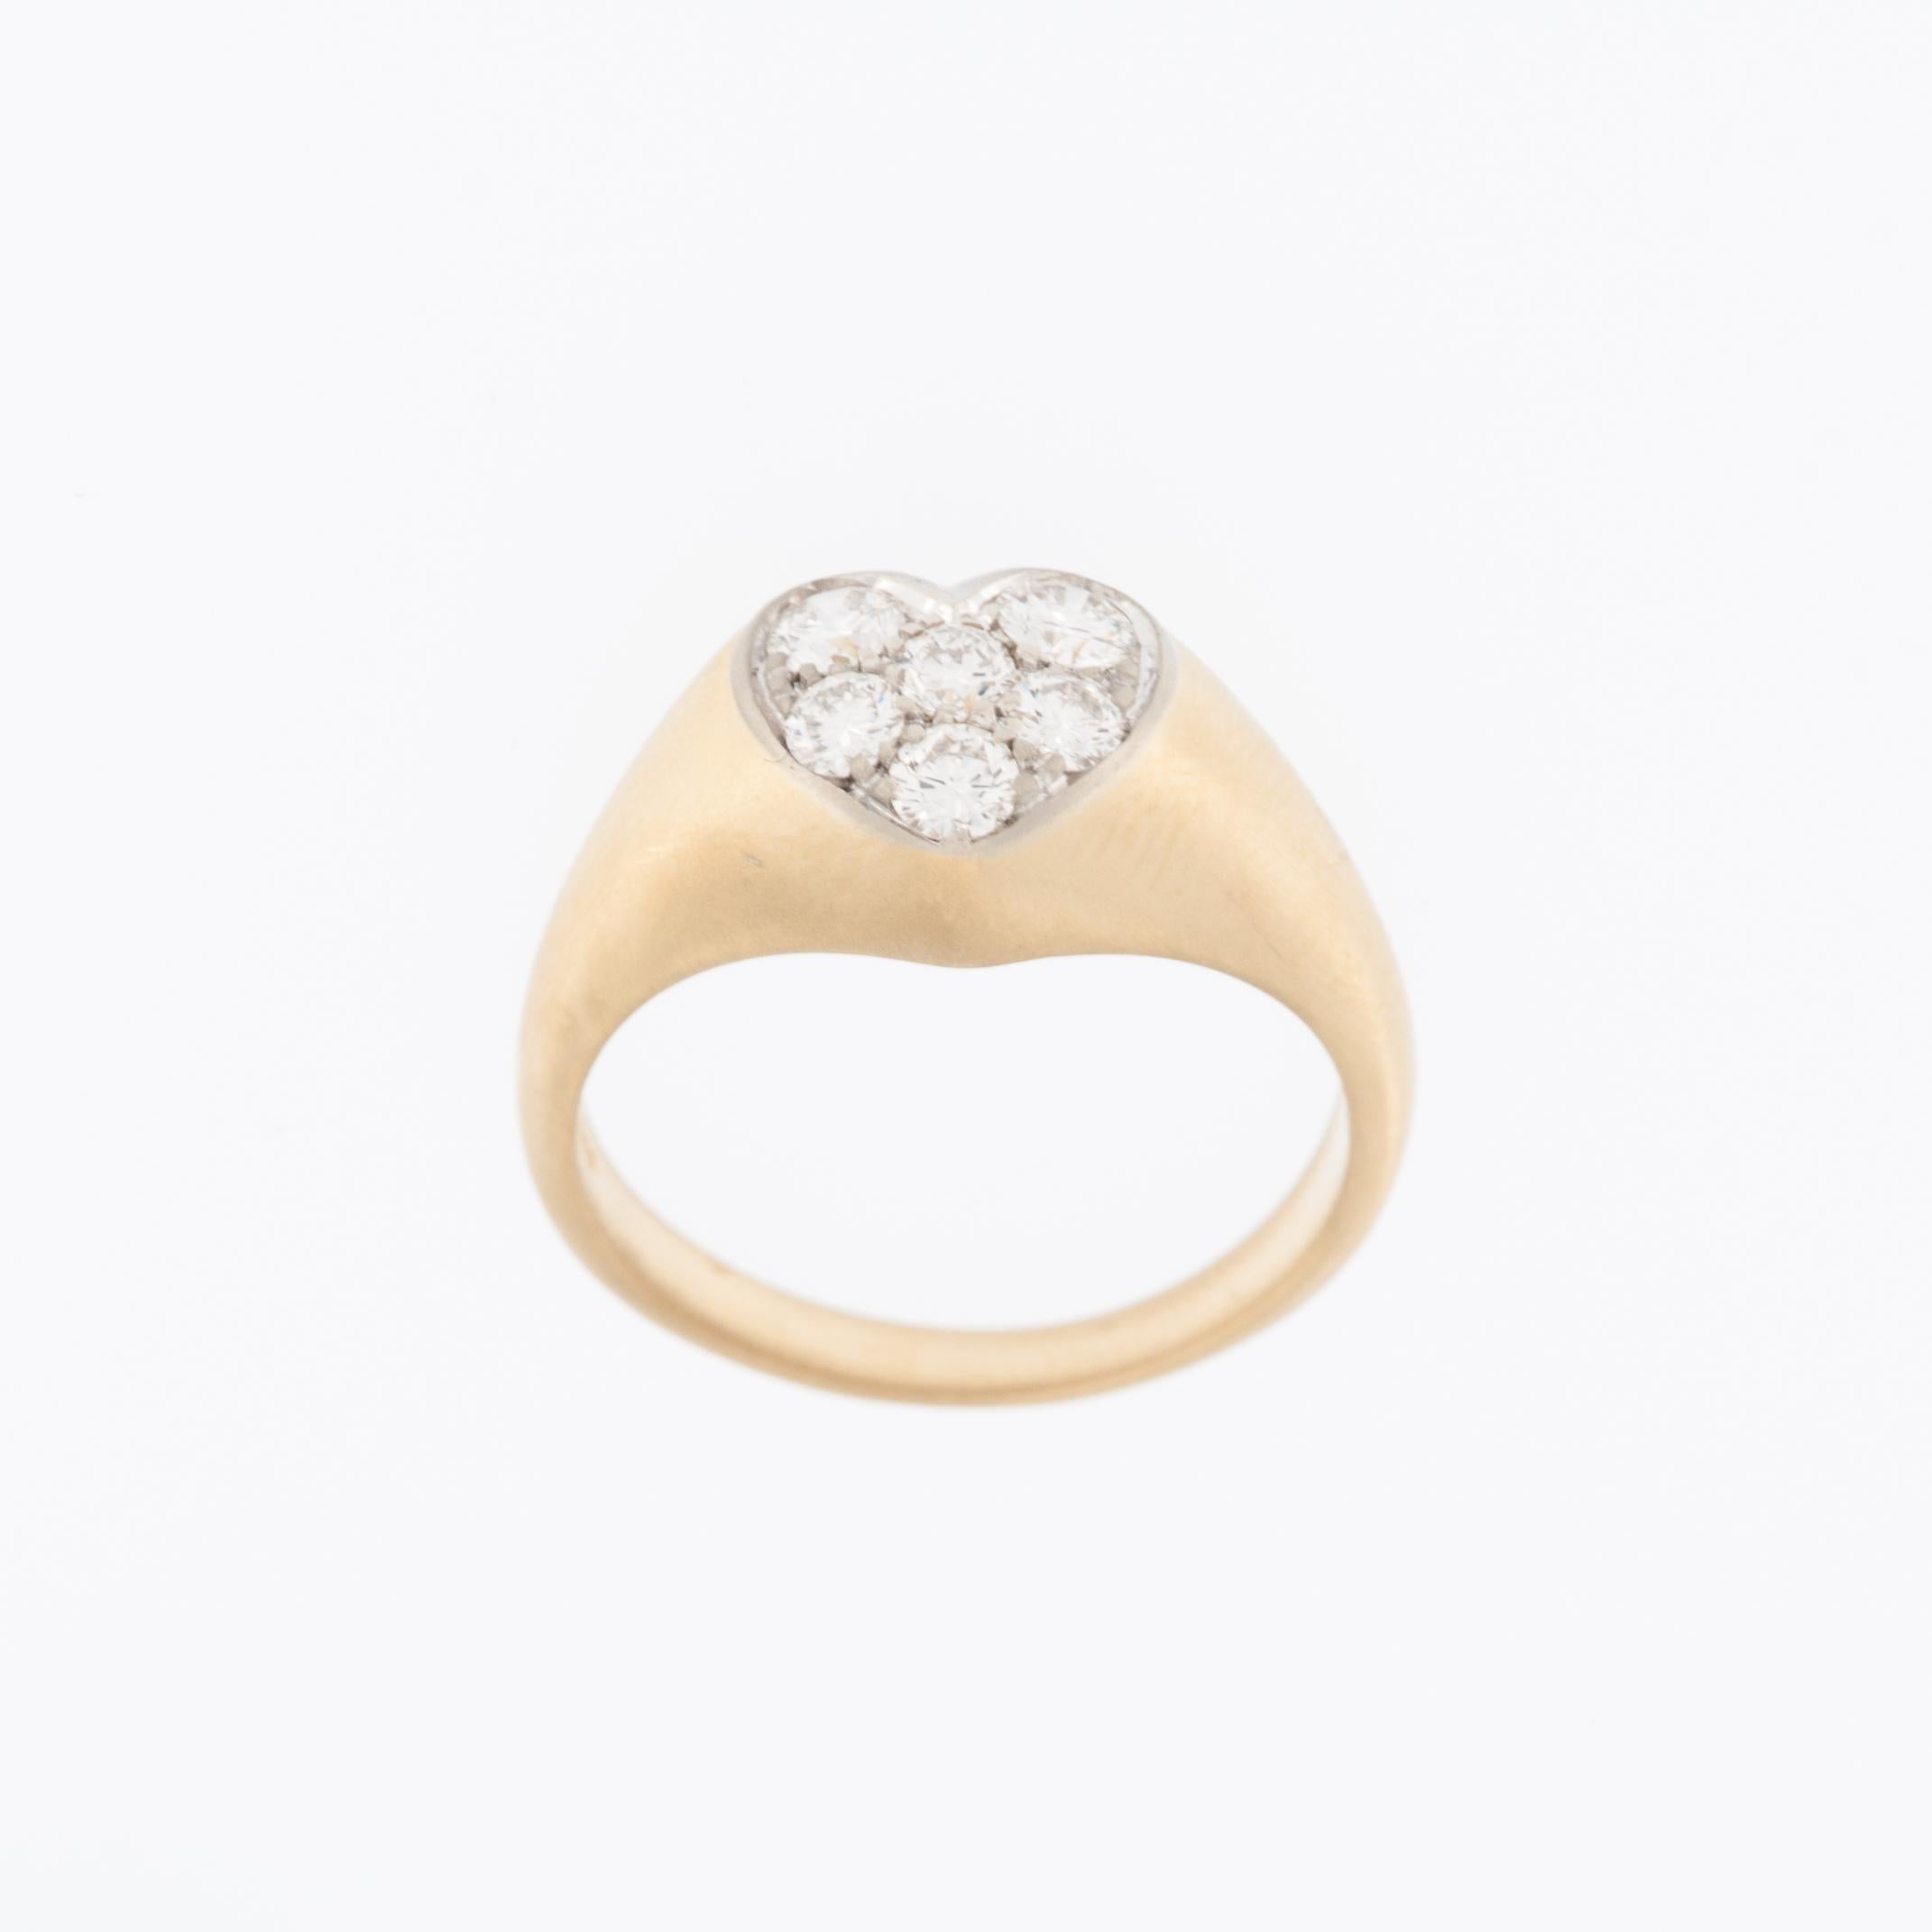 This exquisite piece of jewelry combines the timeless elegance of diamonds with the warm allure of 18 karat gold, culminating in a design that exudes both luxury and sentimentality. 

Crafted from 18 karat yellow and white gold, this ring offers a